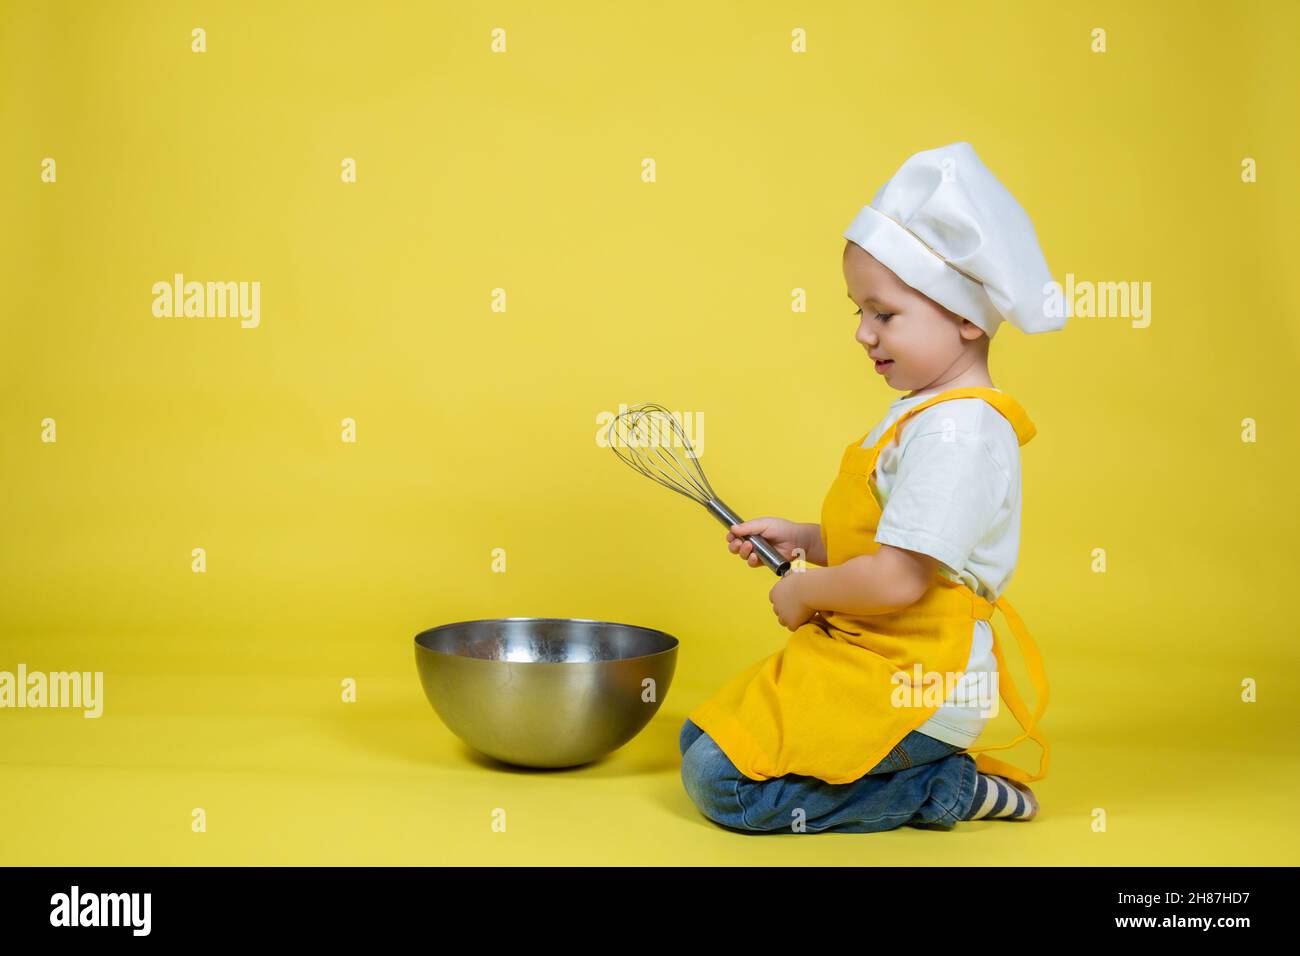 Little caucasian Boy playing chef, boy in apron and chef's hat sitting on the floor with a bowl and whisk on yellow background Stock Photo